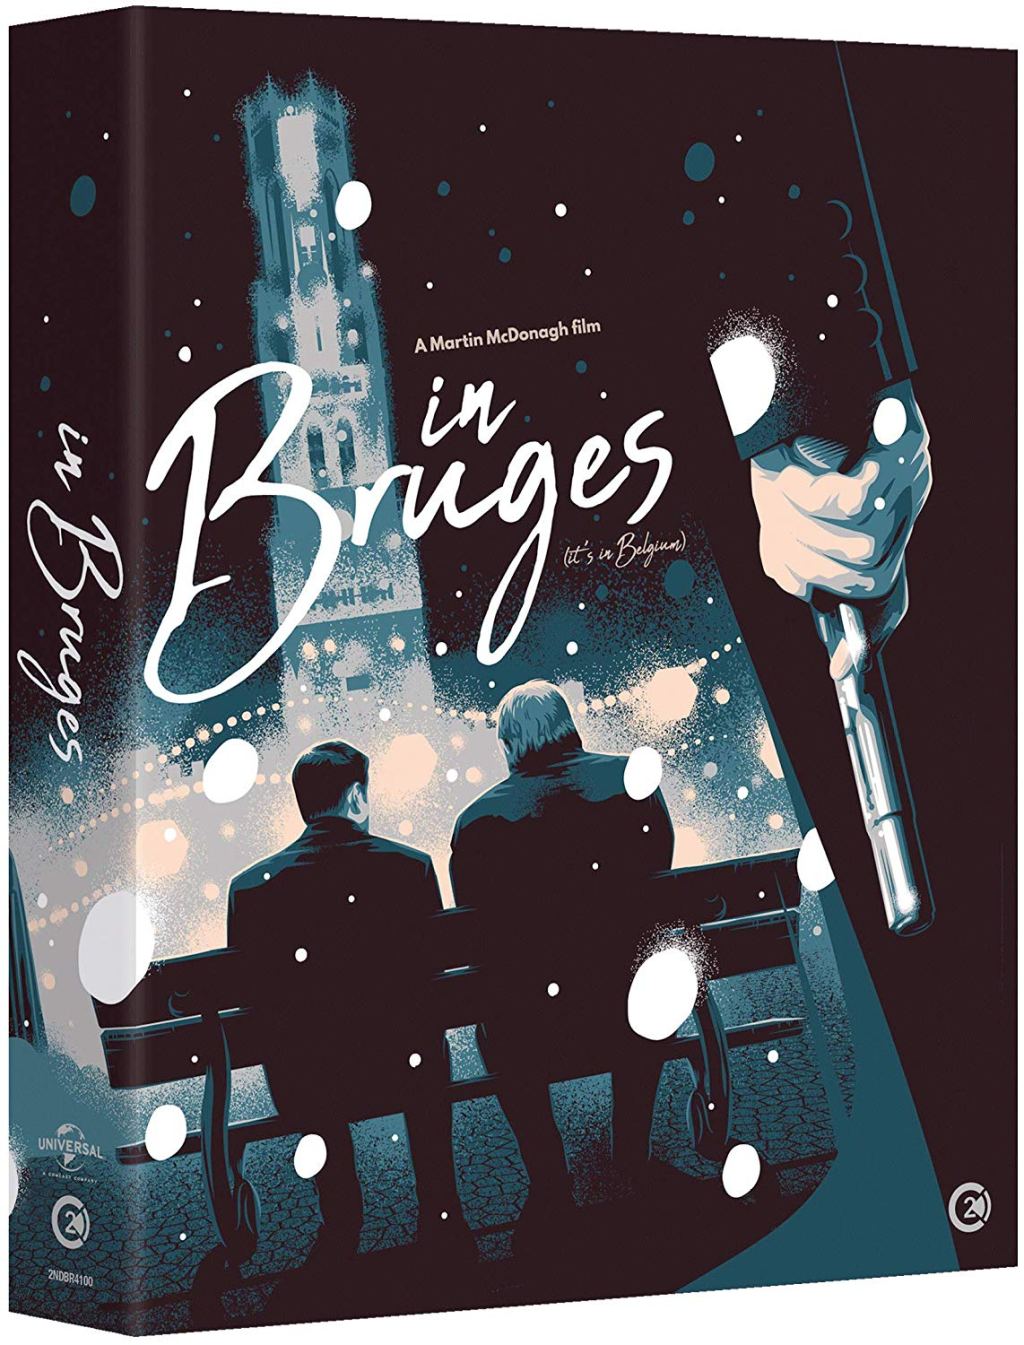 In Bruges Blu-ray review: Dir. Martin McDonagh [Second Sight Films]